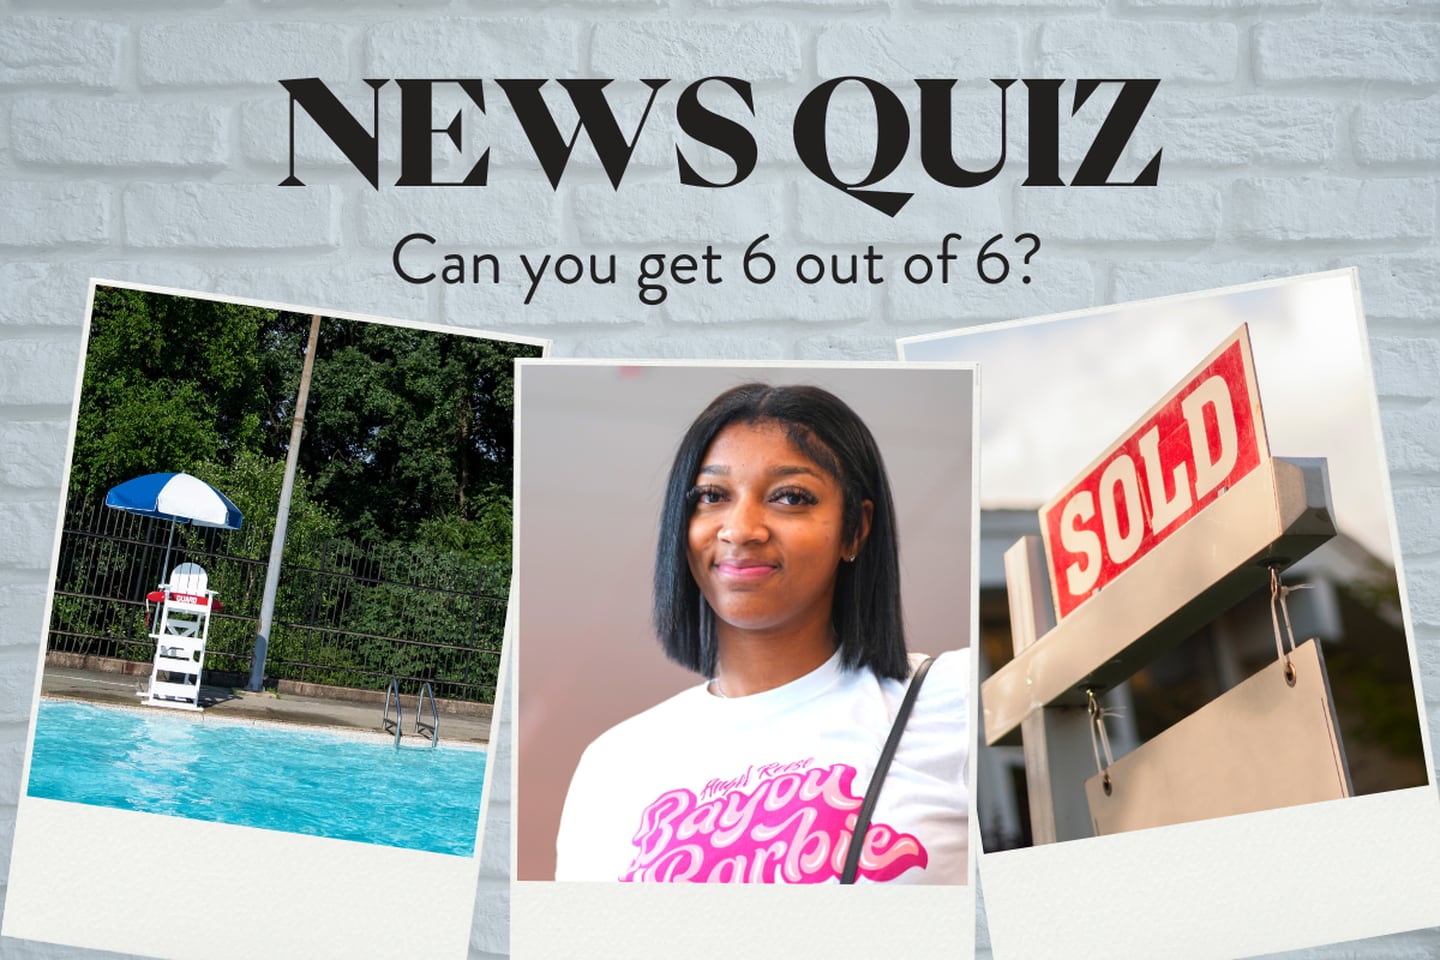 A promotional image for a weekly news quiz shows three pictures: a pool, a portrait of Angel Reese and a "sold" real estate sign, pictured against a white-brick background.